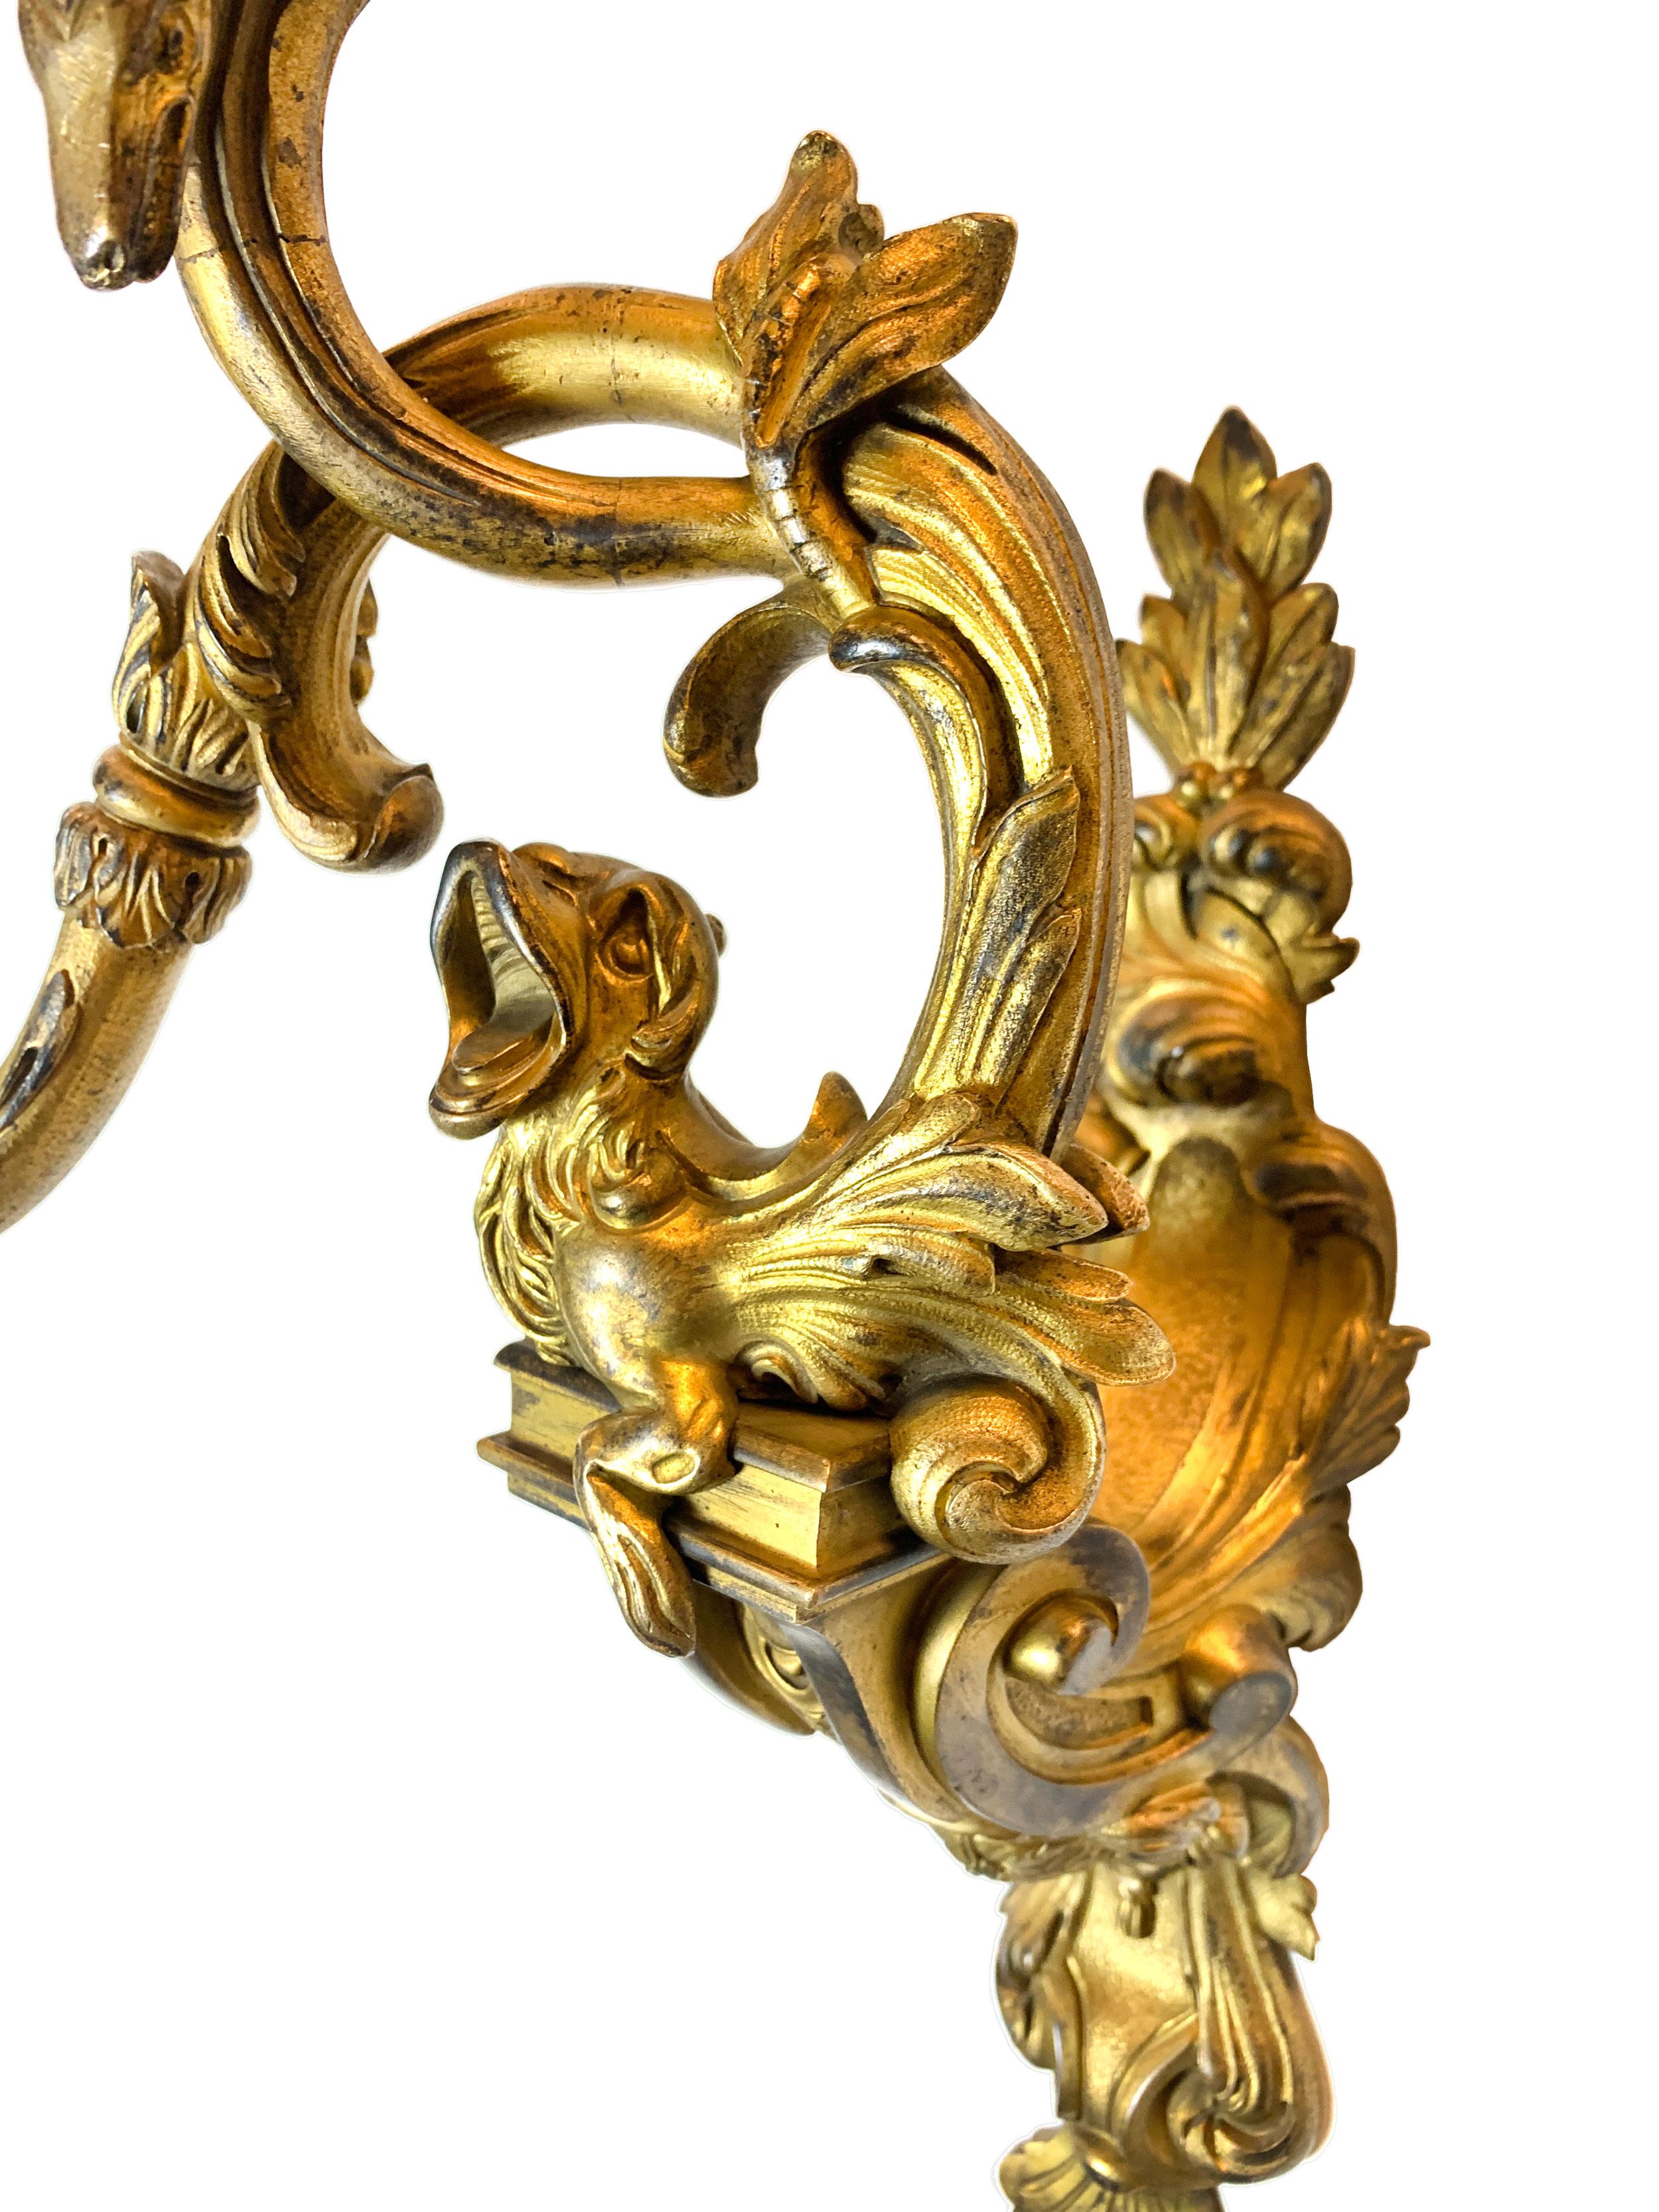 Pair of 19th Century Louis XV Style Ormolu Sconces After André-Charles Boulle For Sale 3